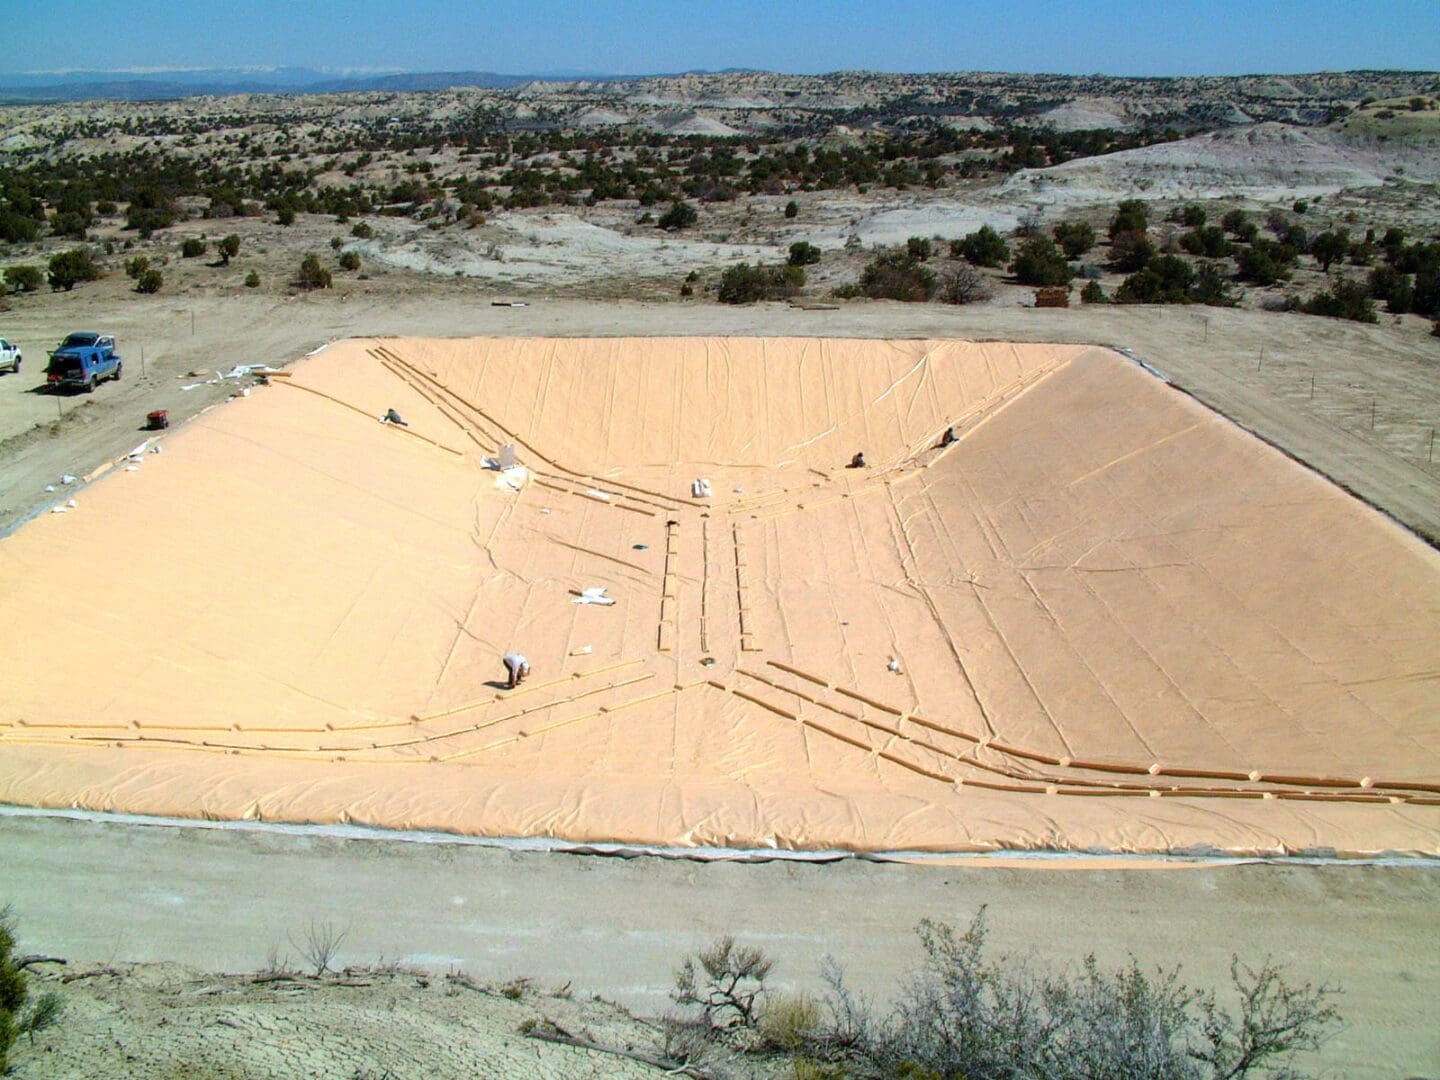 A large sand pit with people working on it.